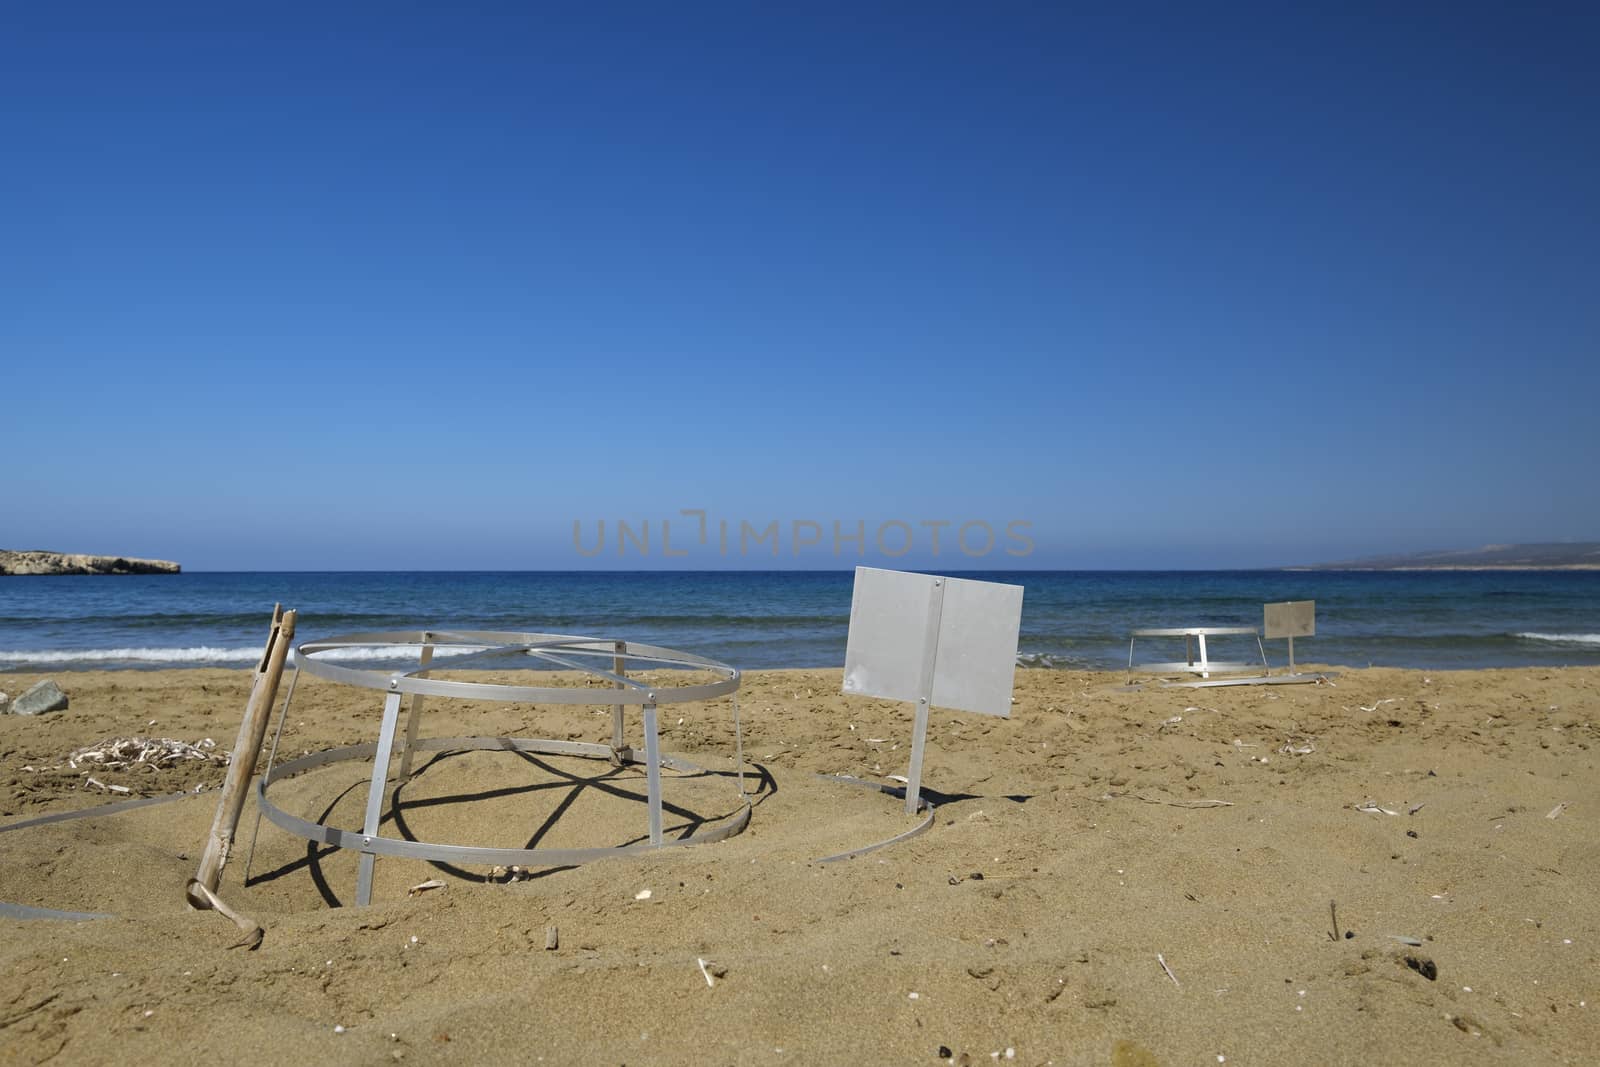 with iron racks protected sea turtles nests on the beach in Cyprus